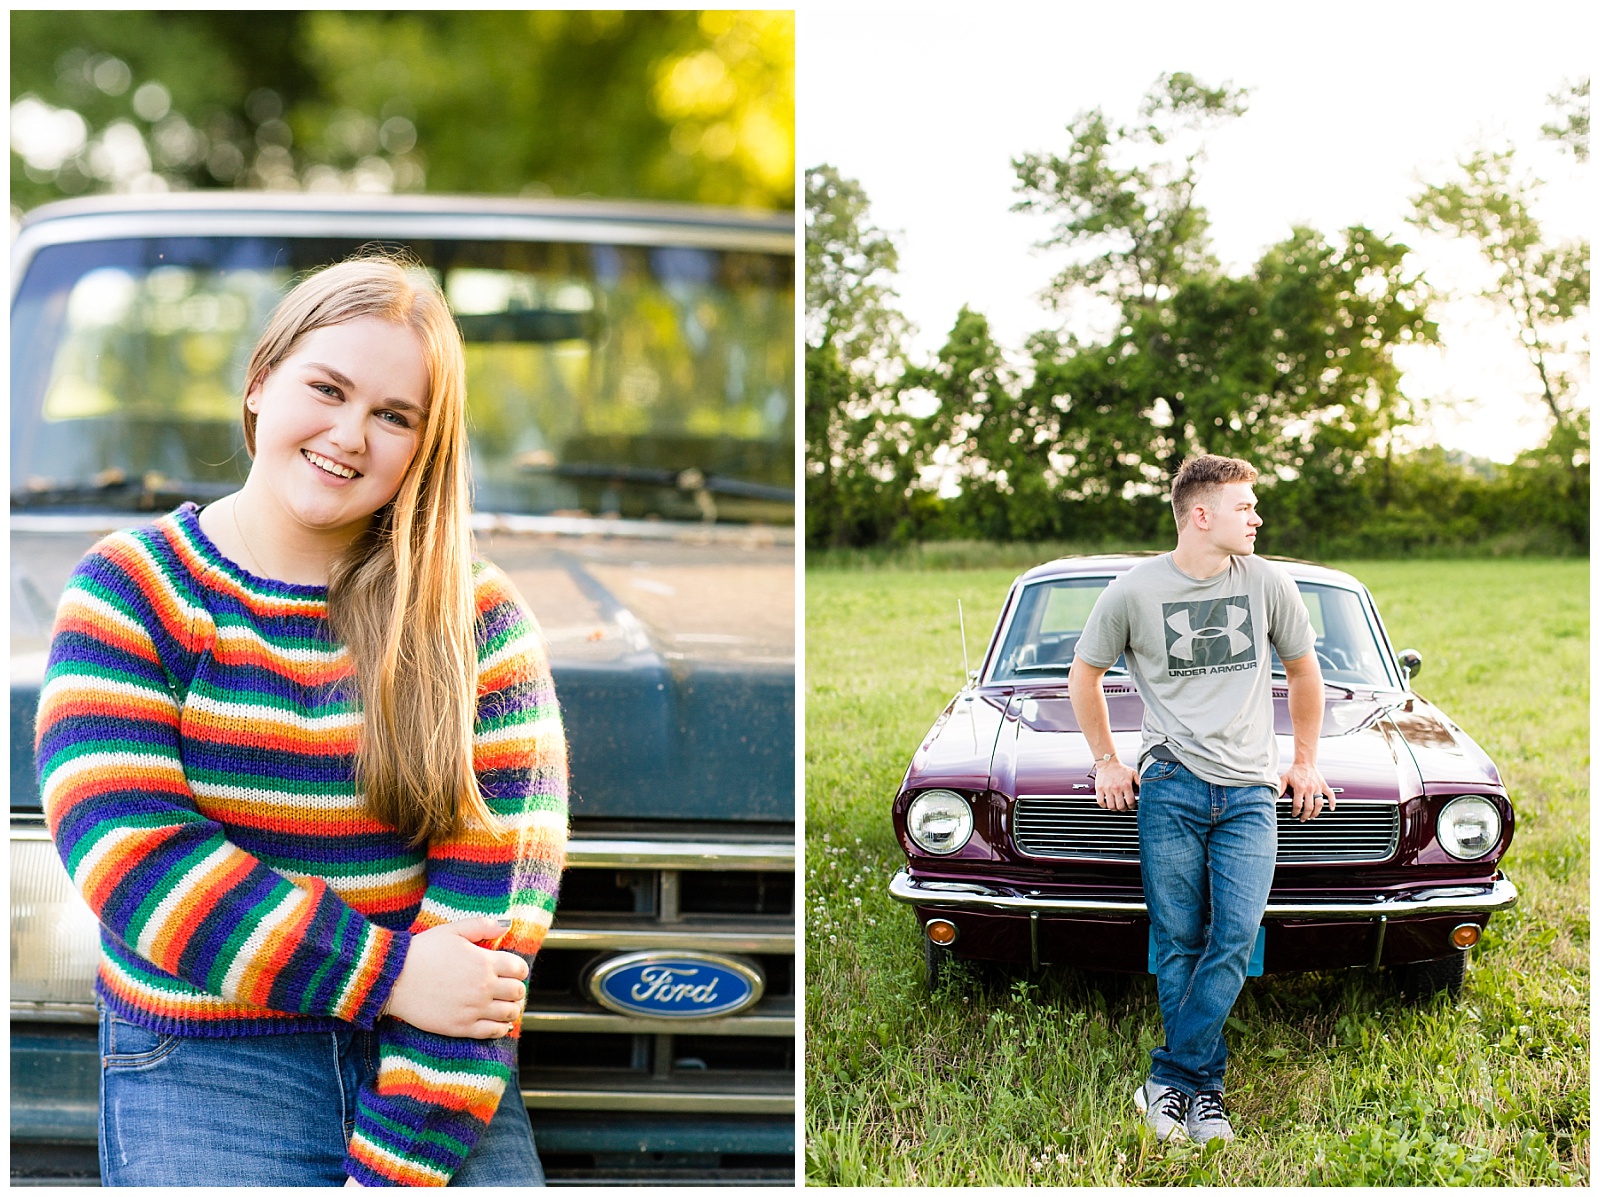 girl in striped shirt with Ford truck and boy with 66 Mustang